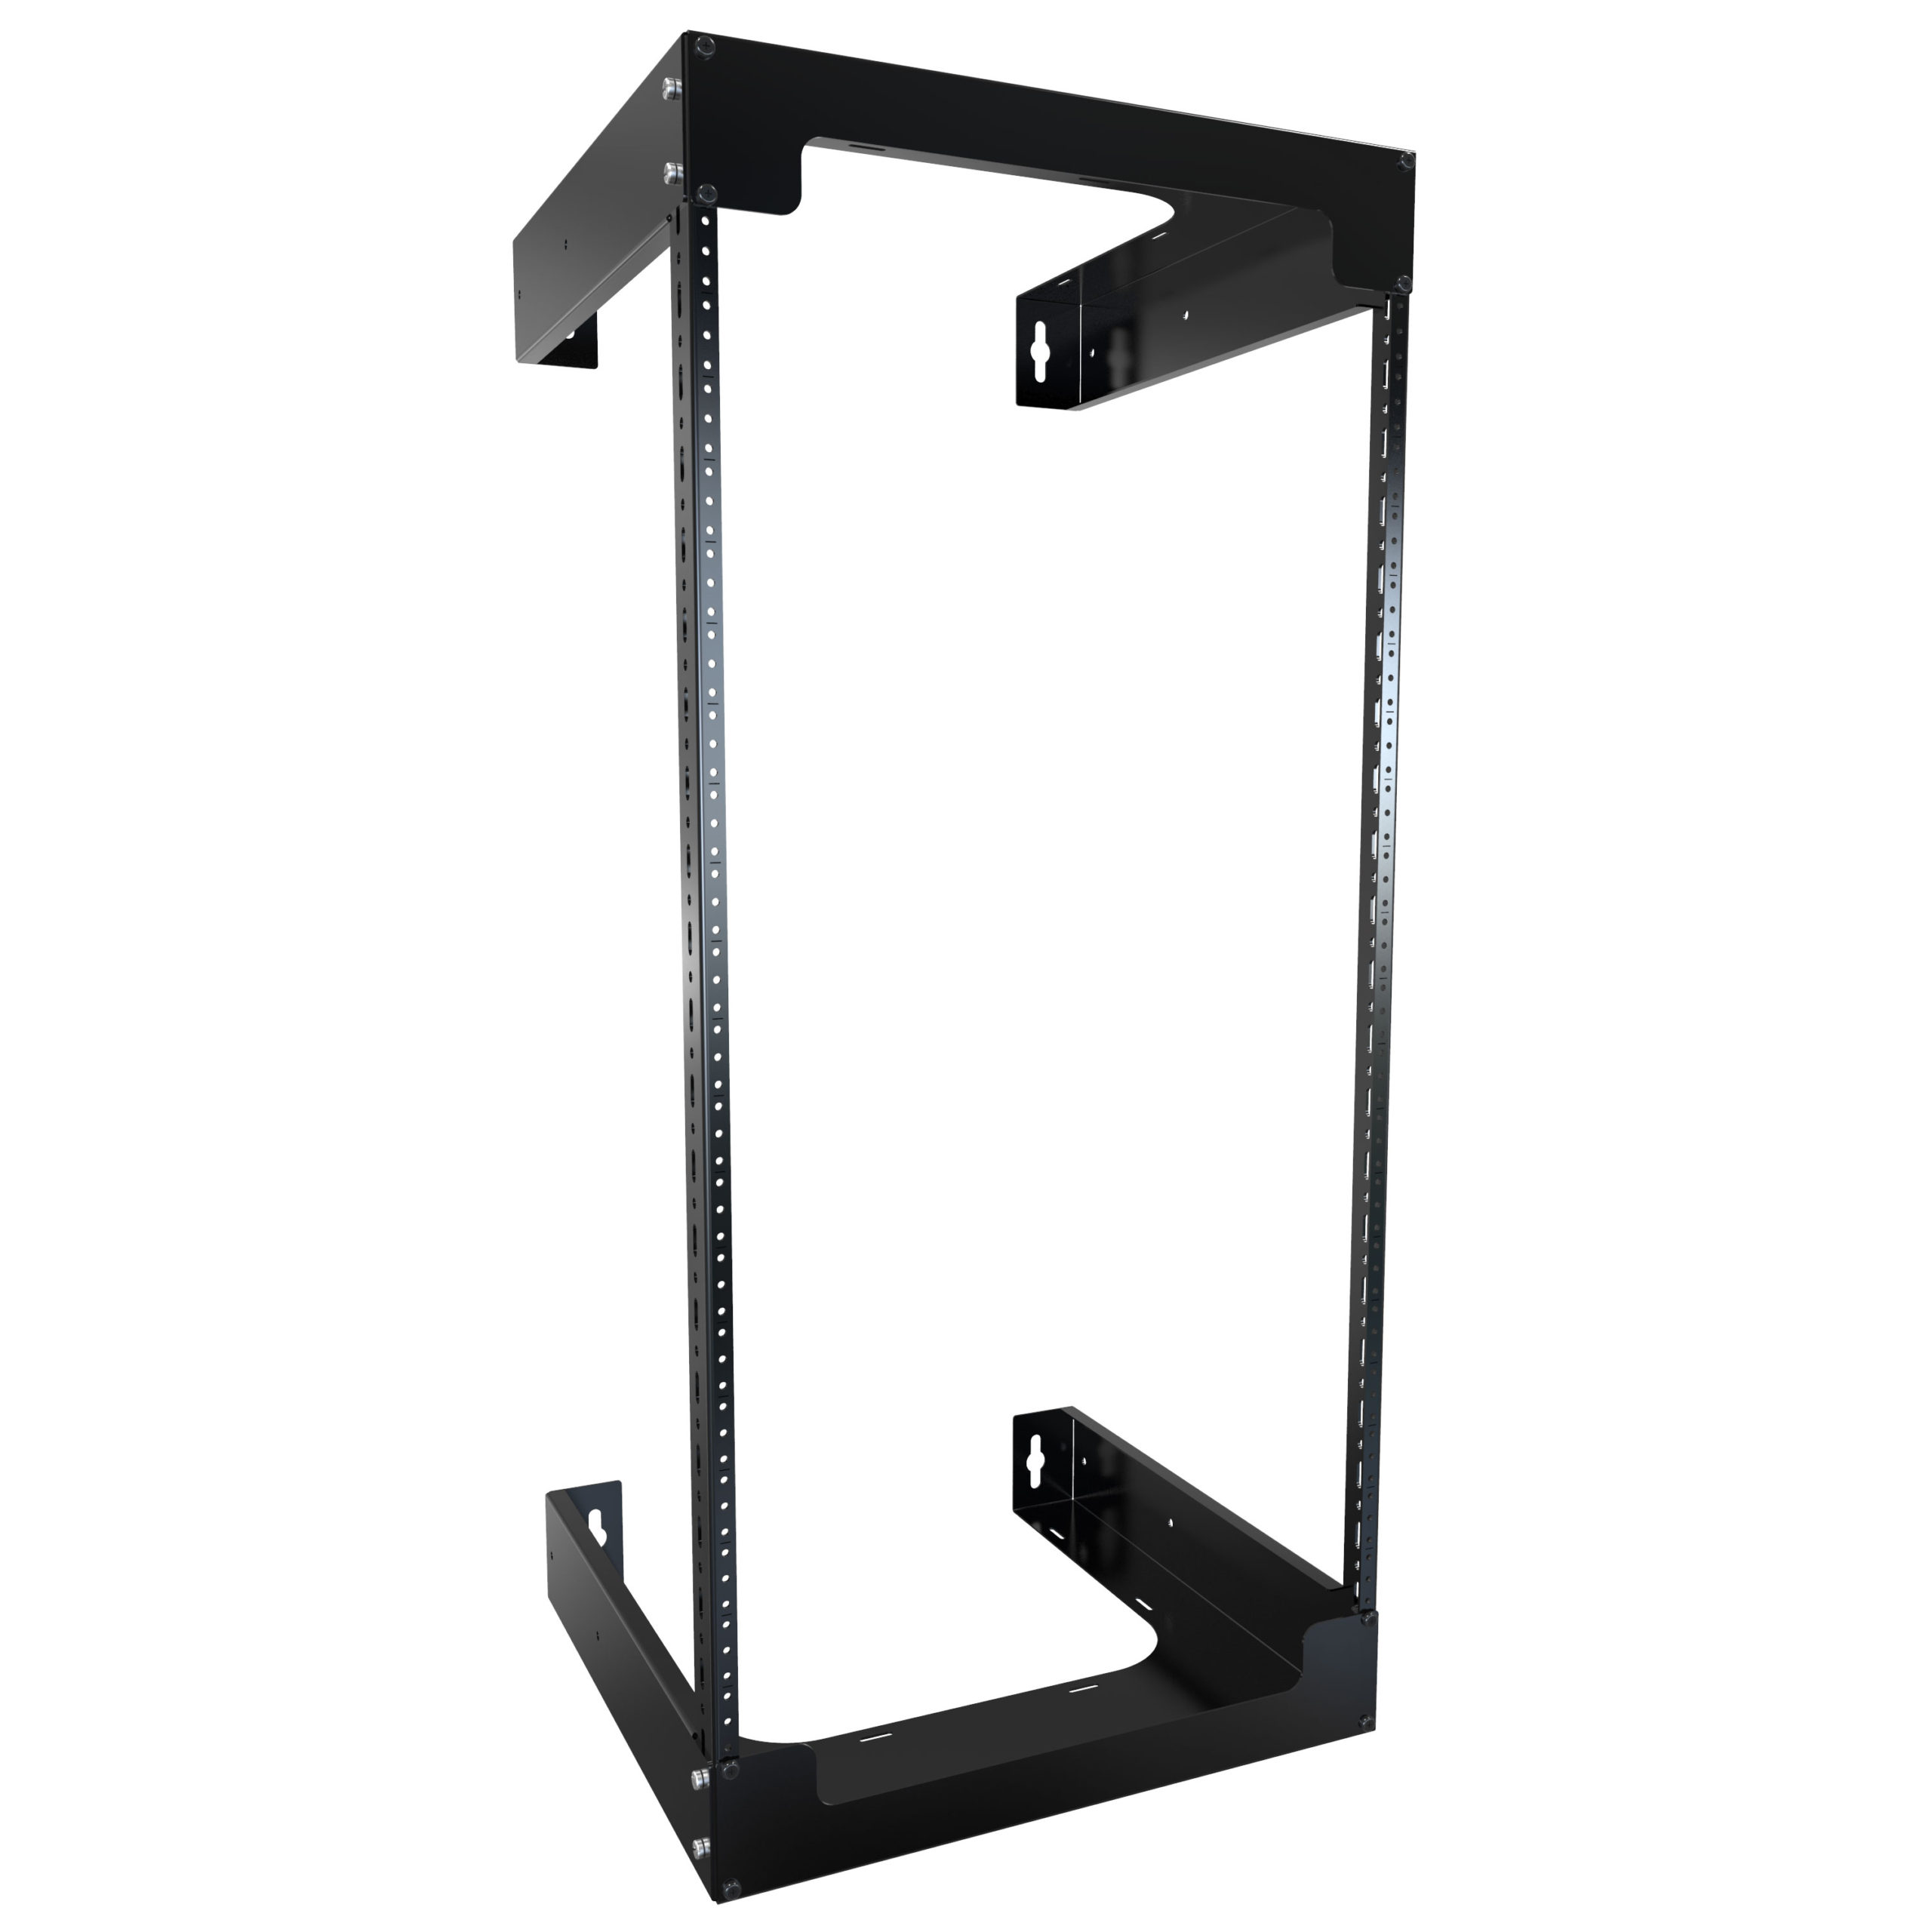 RB-2PW20 – 20U Open Frame Wall Rack 18″D Image